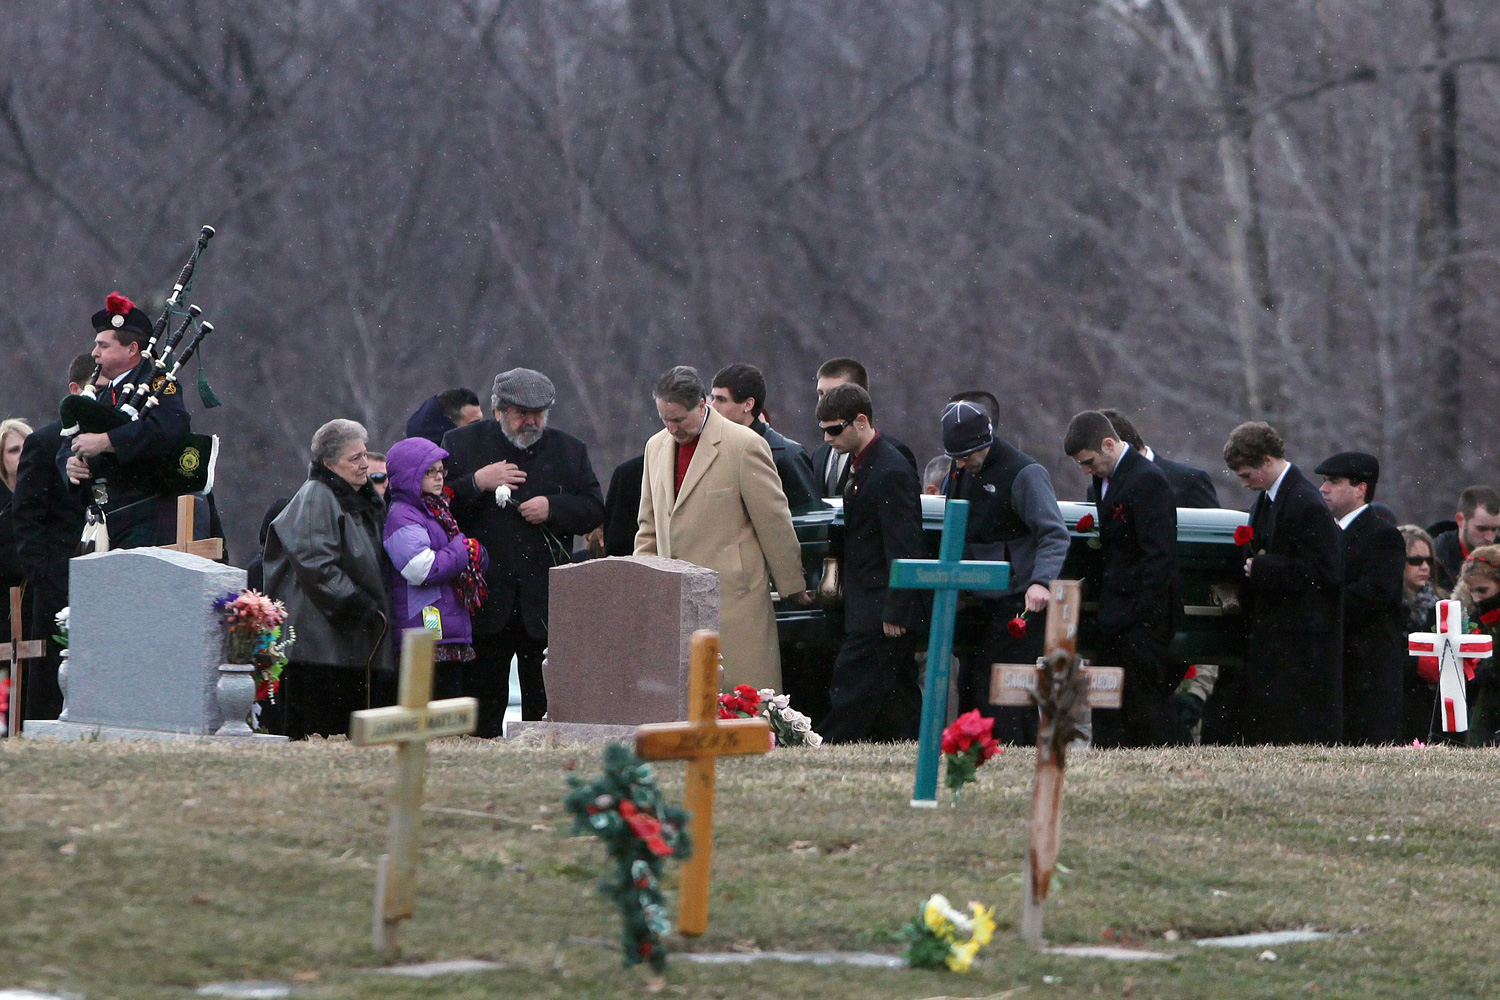 March 3, 2012. The casket of slain Chardon High School student Daniel Parmertor is carried to his gravesite in Chardon, Ohio.